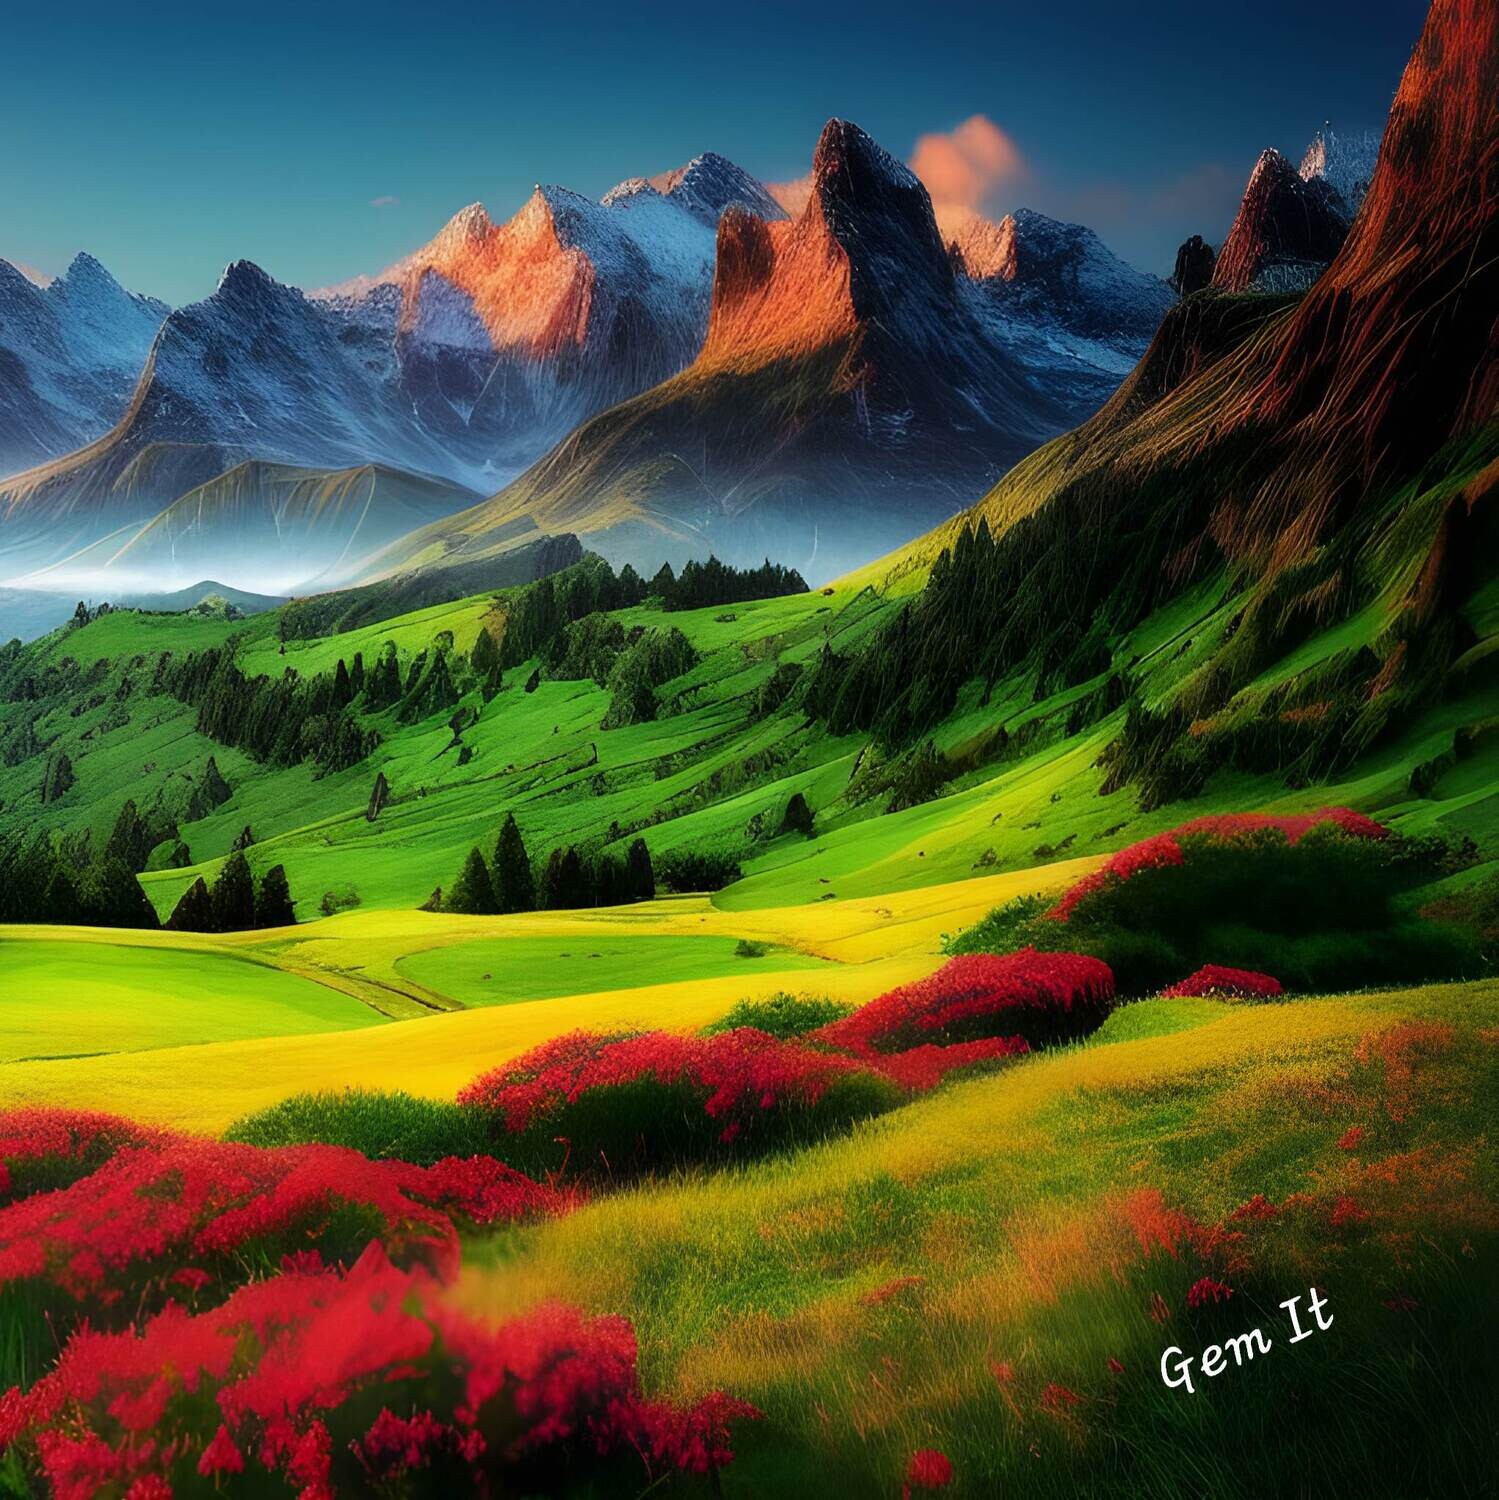 Mountain Scenery 354 - Full Drill Diamond Painting - Specially ordered for you. Delivery is approximately 4 - 6 weeks.